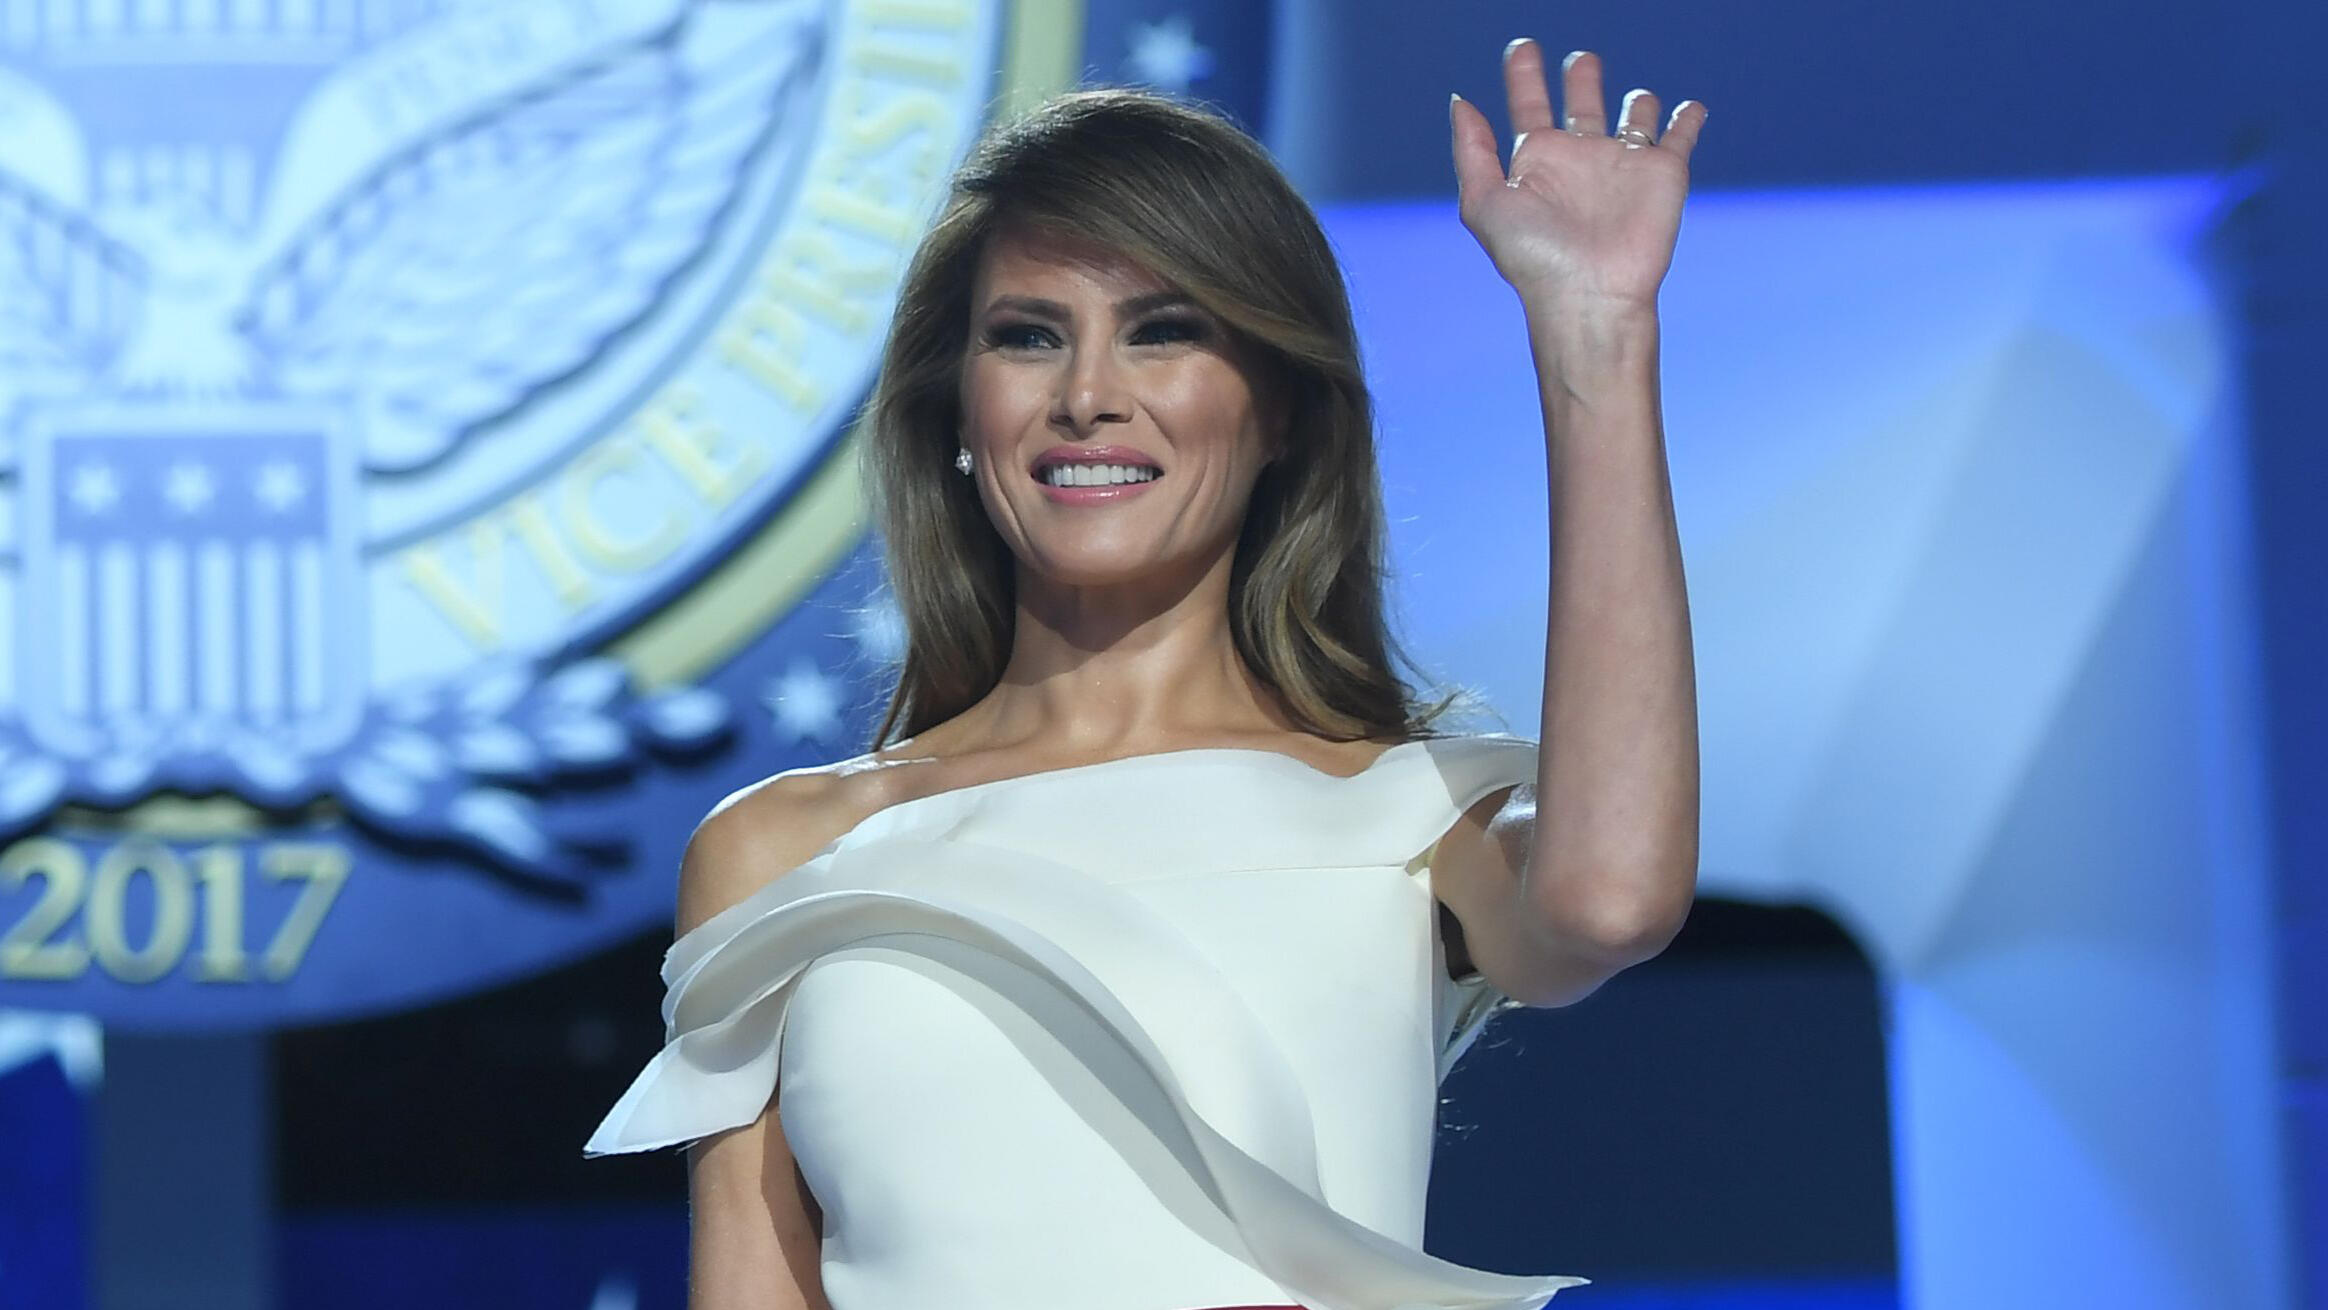 US President Donald Trump looks on as first lady Melania Trump waves during the Freedom Ball at the Washington DC Convention Center following Donald Trump's inauguration as the 45th President of the United States, in Washington, DC, on January 20, 2017.  